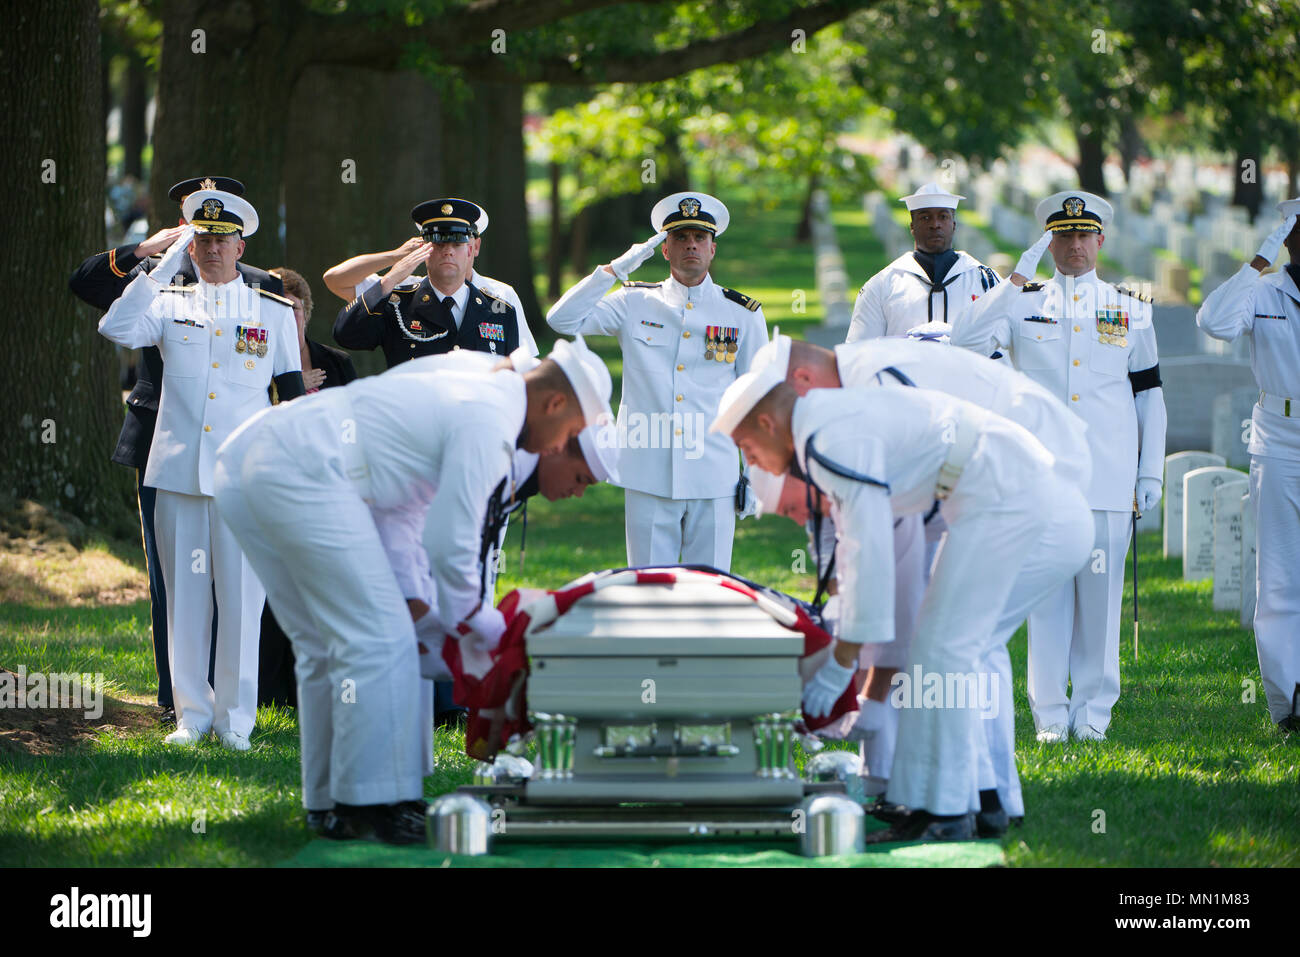 The U.S. Navy Ceremonial Guard participates in the graveside service for U.S. Navy Petty Officer 1st Class Xavier A. Martin at Arlington National Cemetery, Arlington, Va., Aug. 9, 2017.  Martin perished when the USS Fitzgerald (DDG 62) was involved in a collision with the Philippine-flagged merchant vessel ACX Crystal, flooding the berthing compartment he was occupying.  Martin was buried with standard honors in Section 60. (U.S. Army photo by Elizabeth Fraser / Arlington National Cemetery / released) Stock Photo